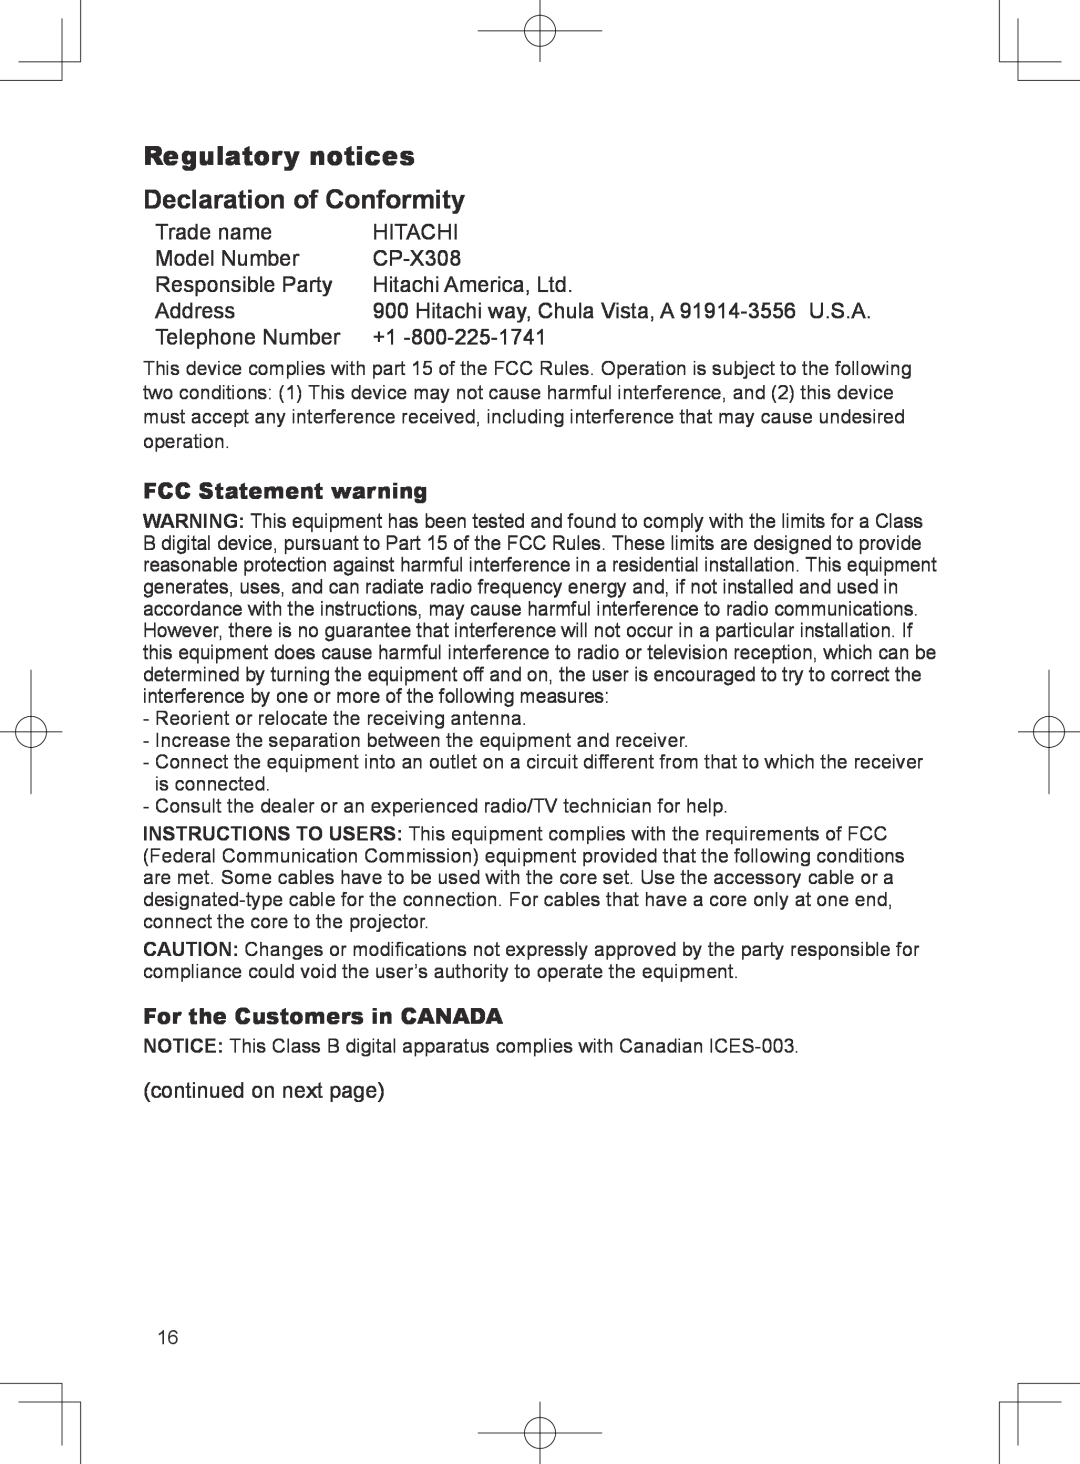 Dukane 8781 user manual Regulatory notices Declaration of Conformity, FCC Statement warning, For the Customers in CANADA 